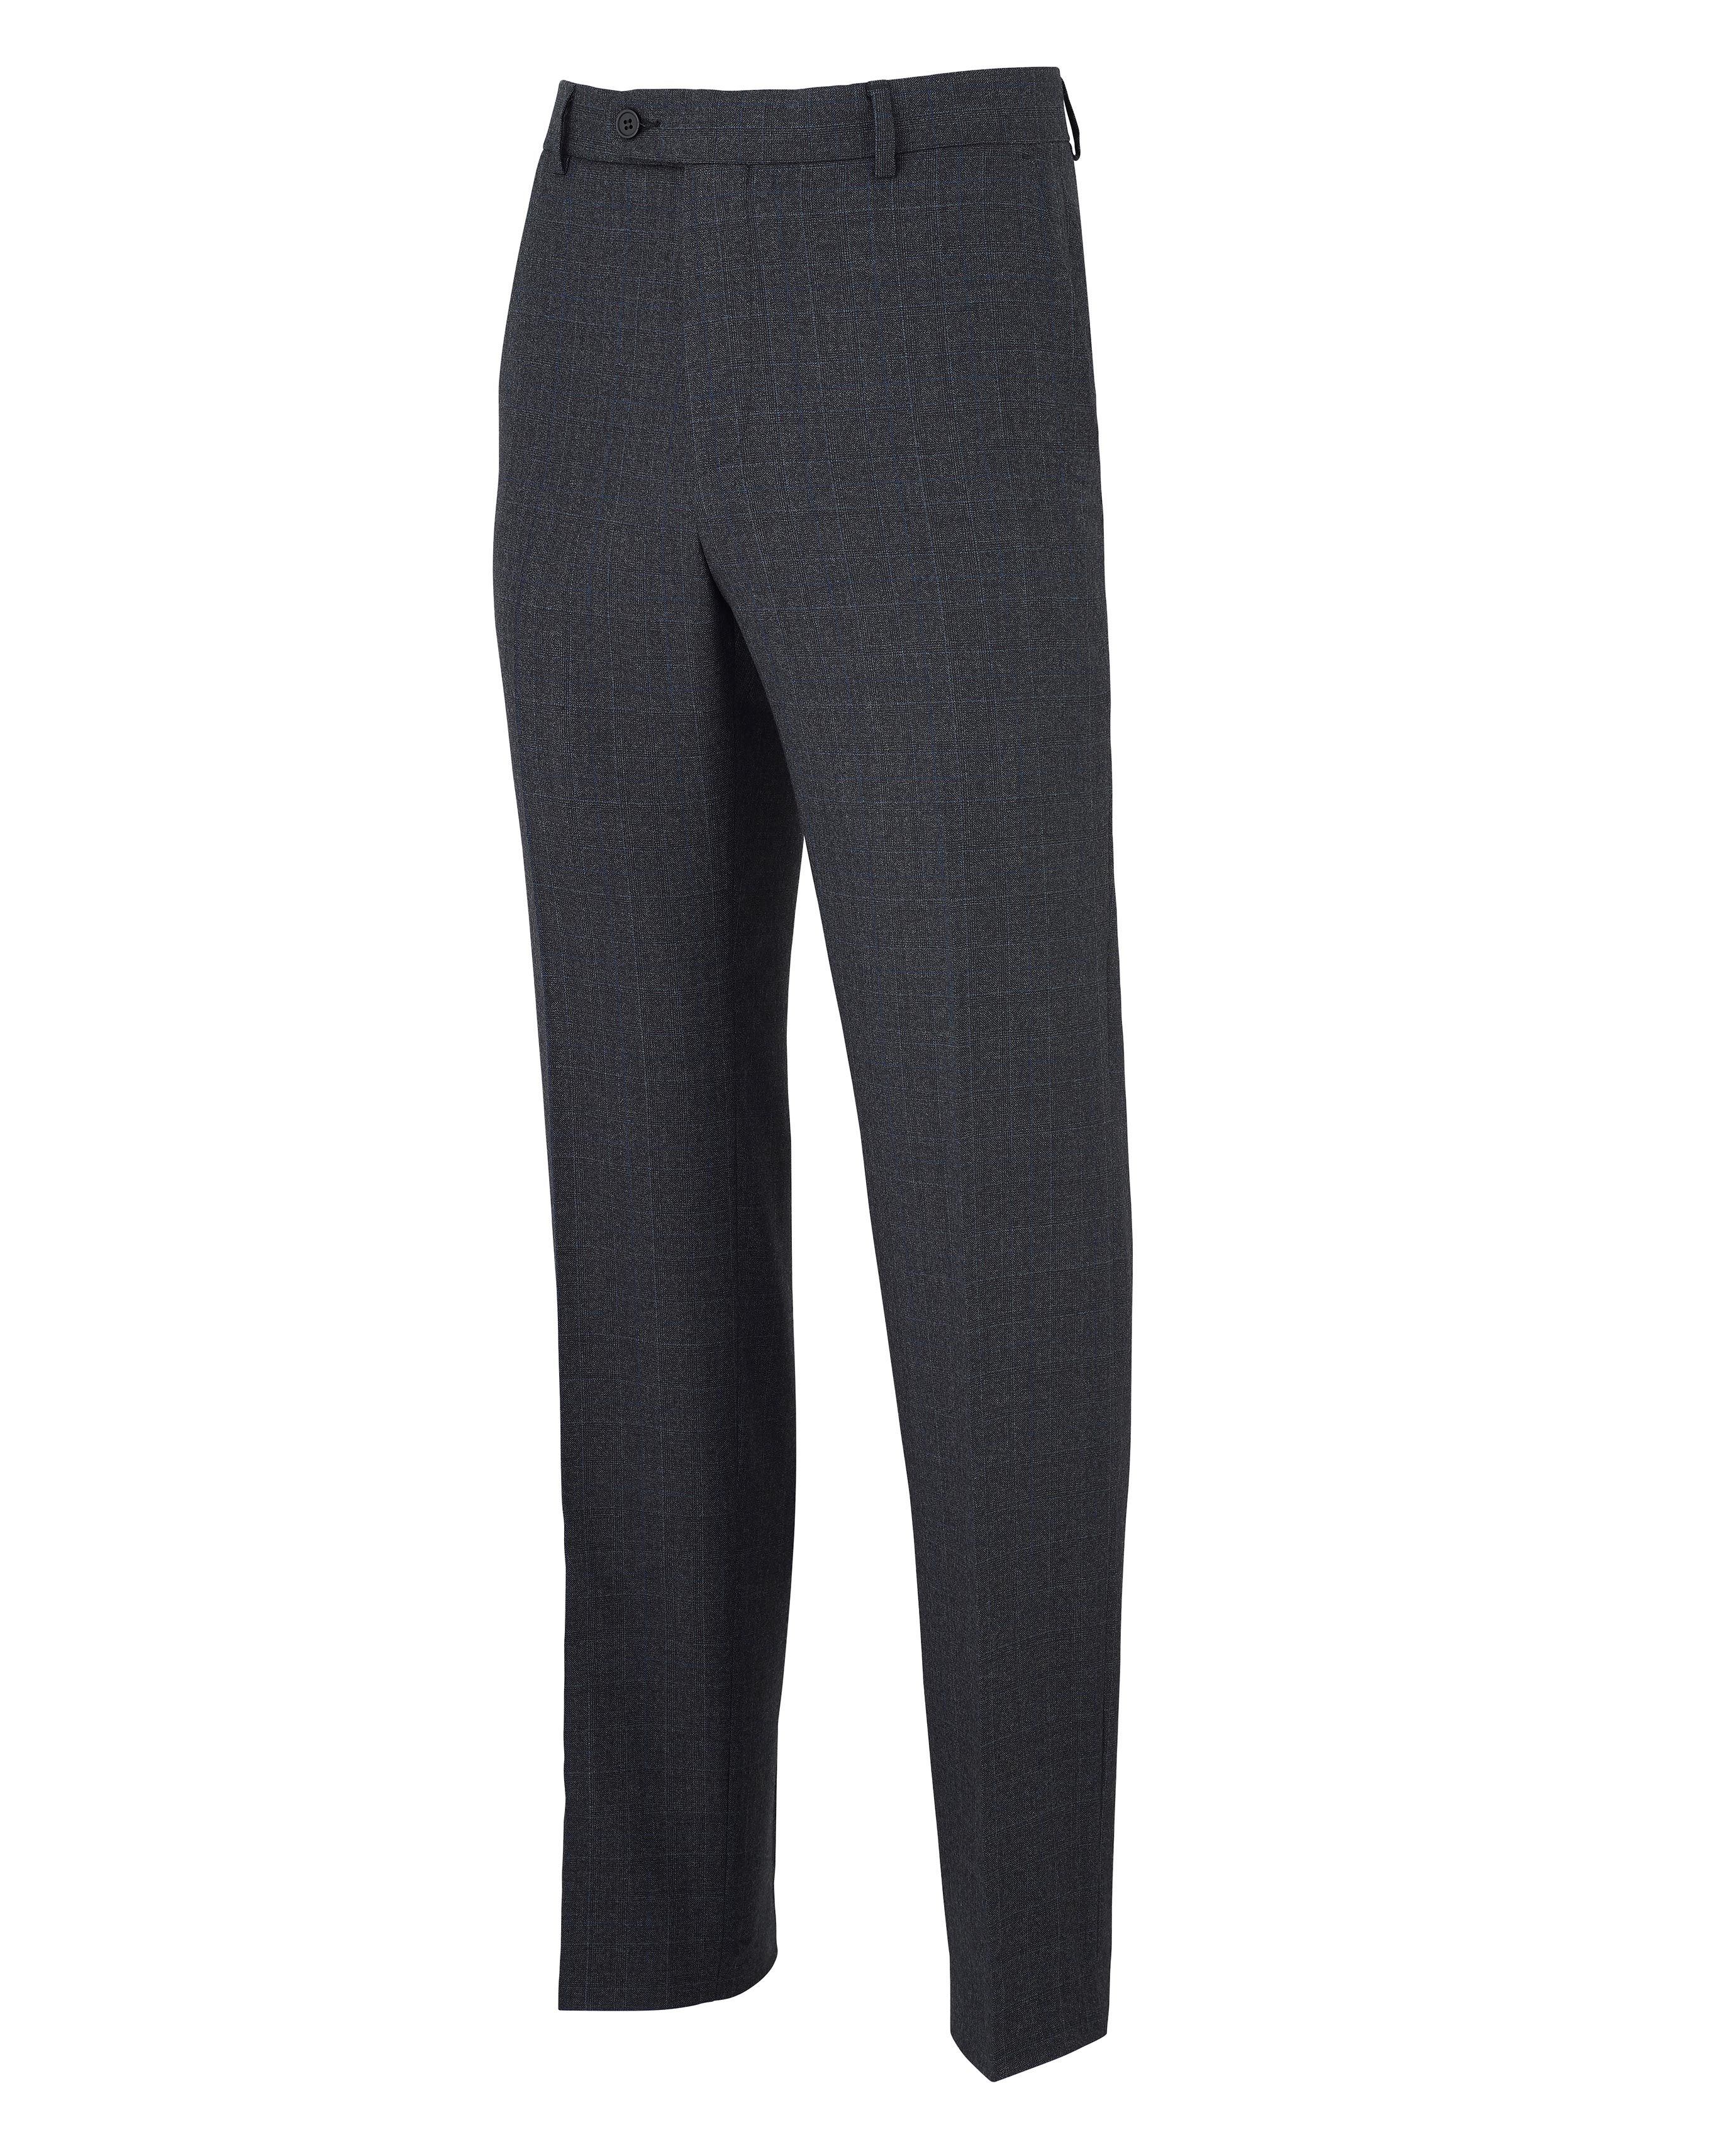 Men’s luxury grey check wool-blend tailored suit trousers | Savile Row Co